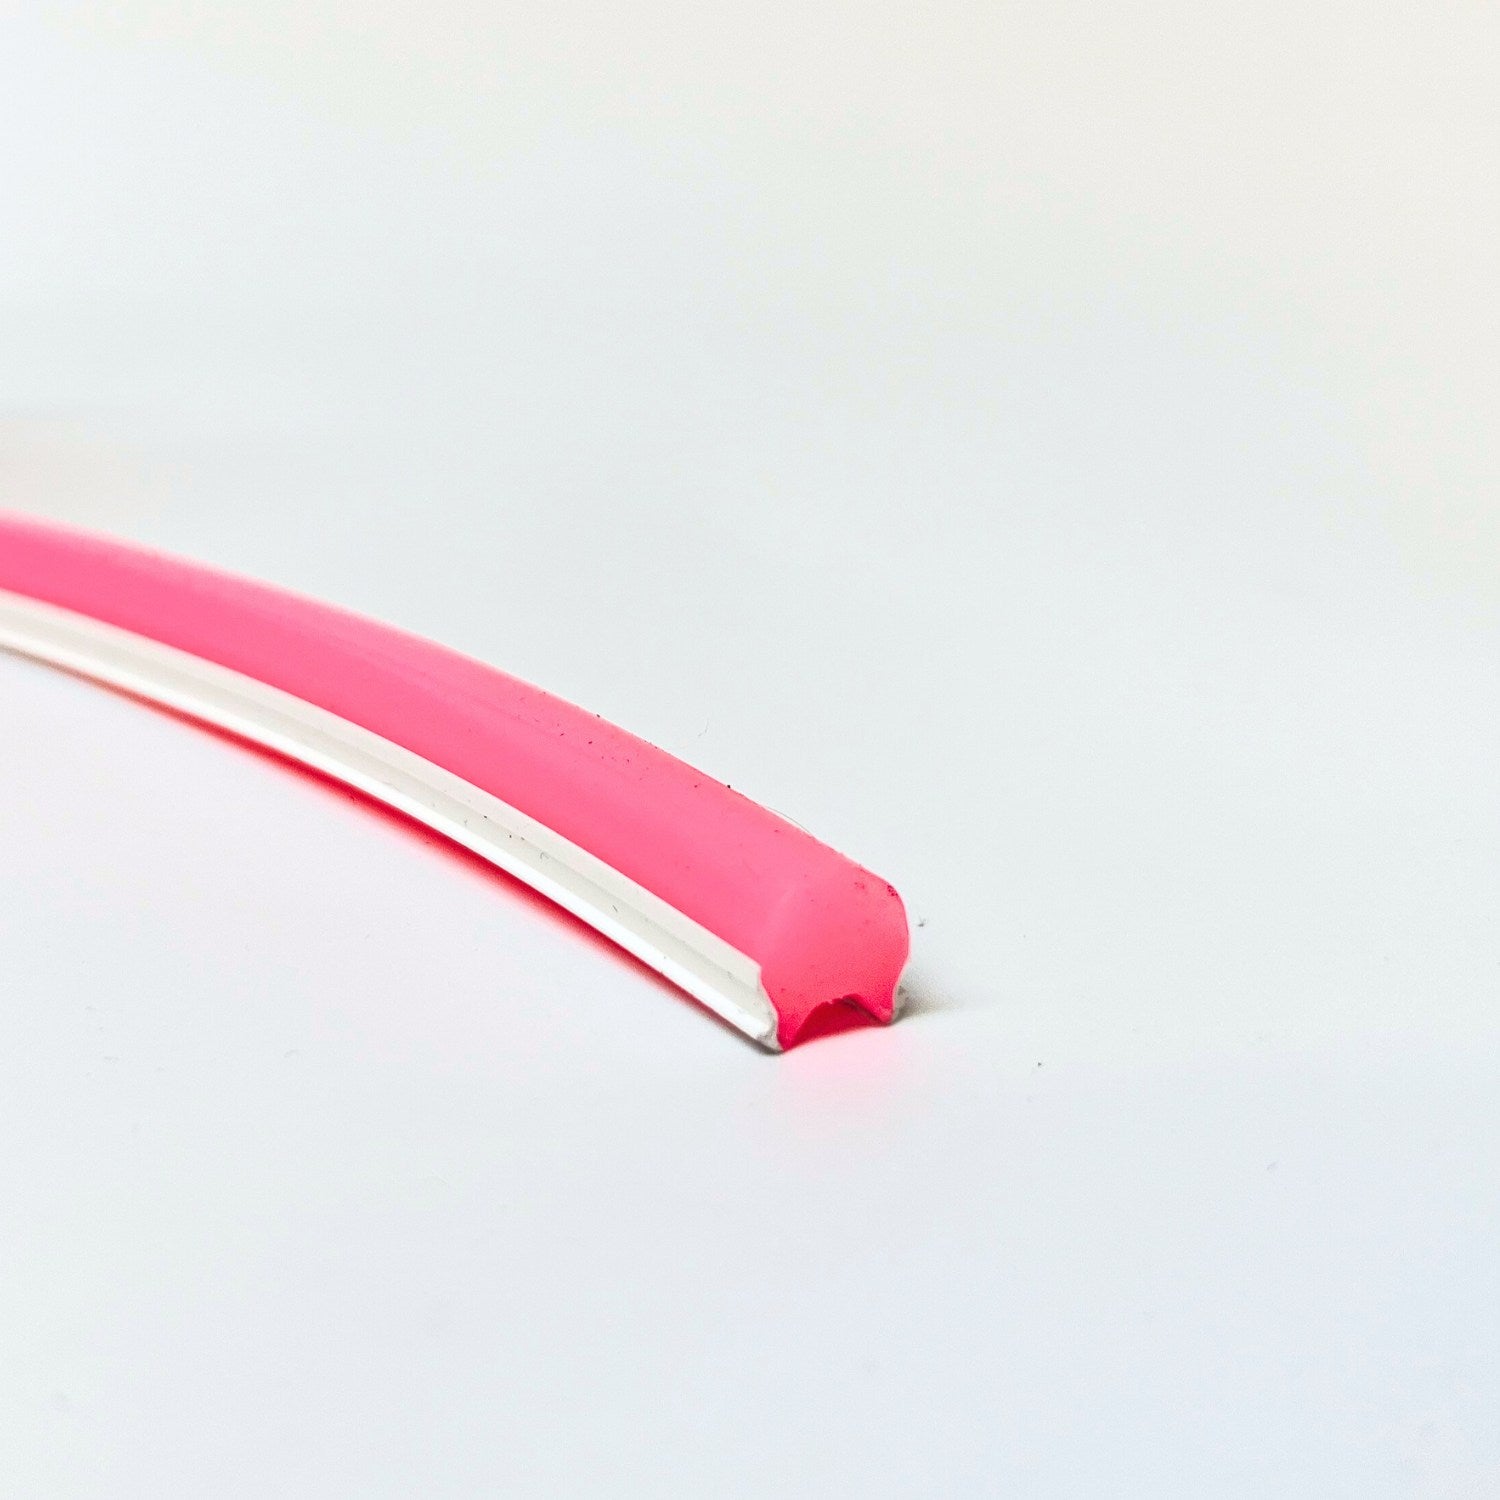 Pink Silicone Neon Flex Tube Diffuser Body for LED Strip Lights Neon Signs 8mm - ATOM LED